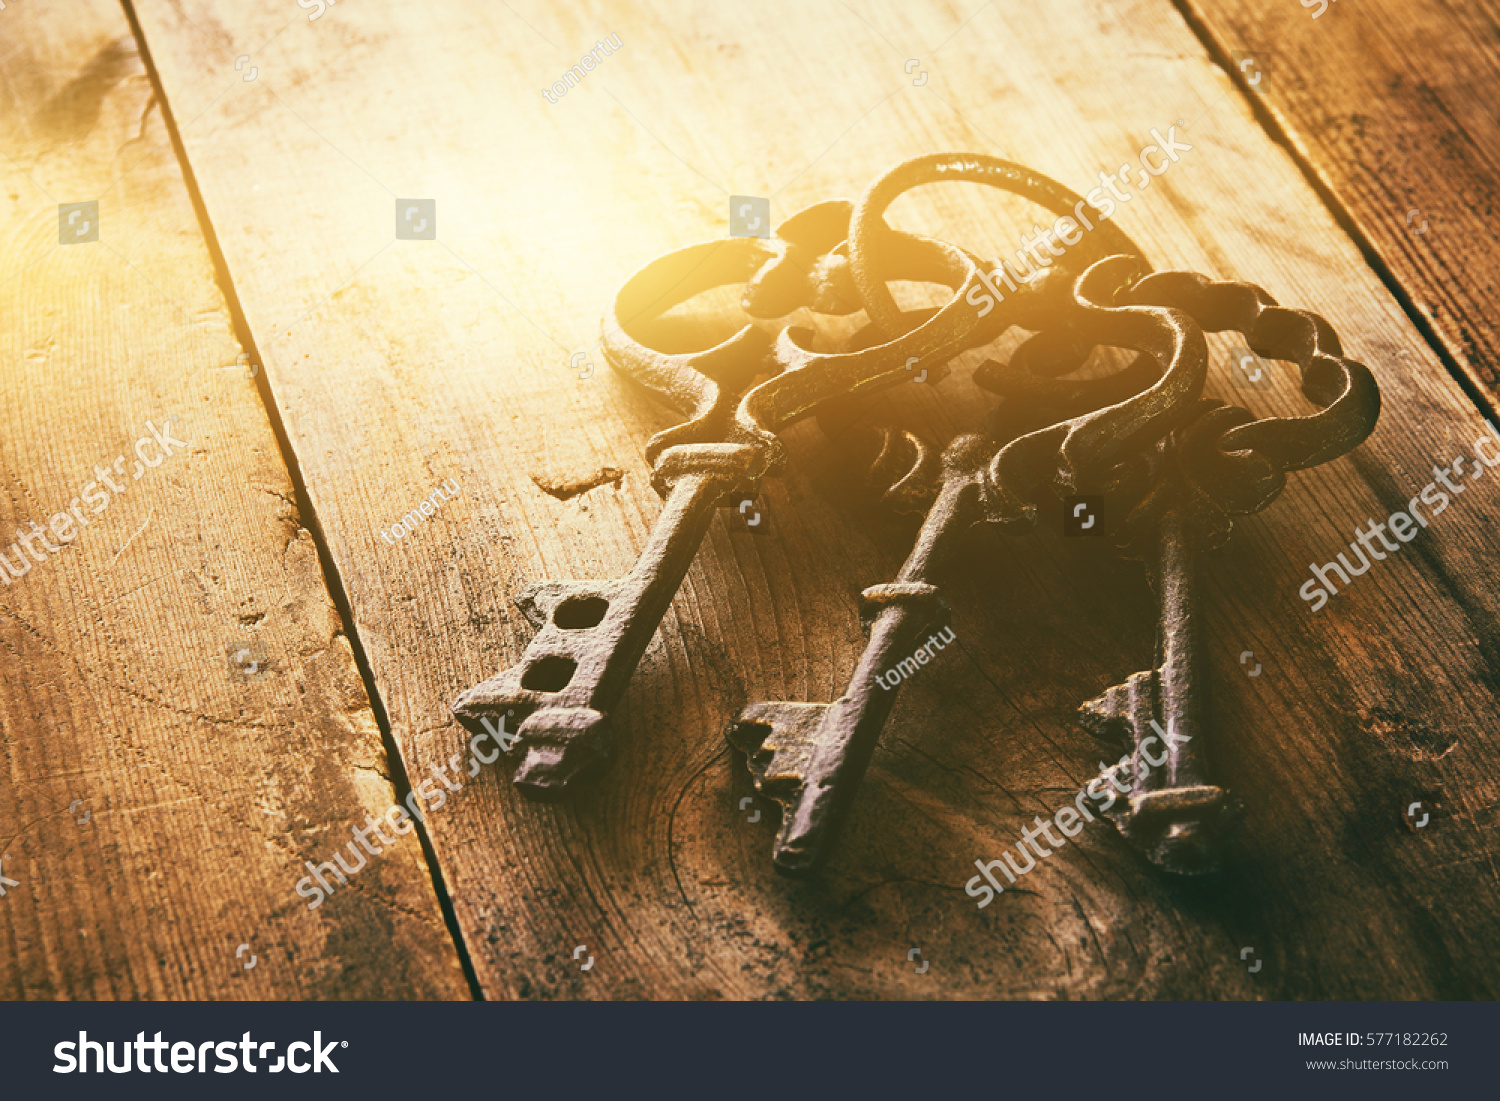 close up image of vintage skeleton keys over wooden table and bright light as revelation concept #577182262